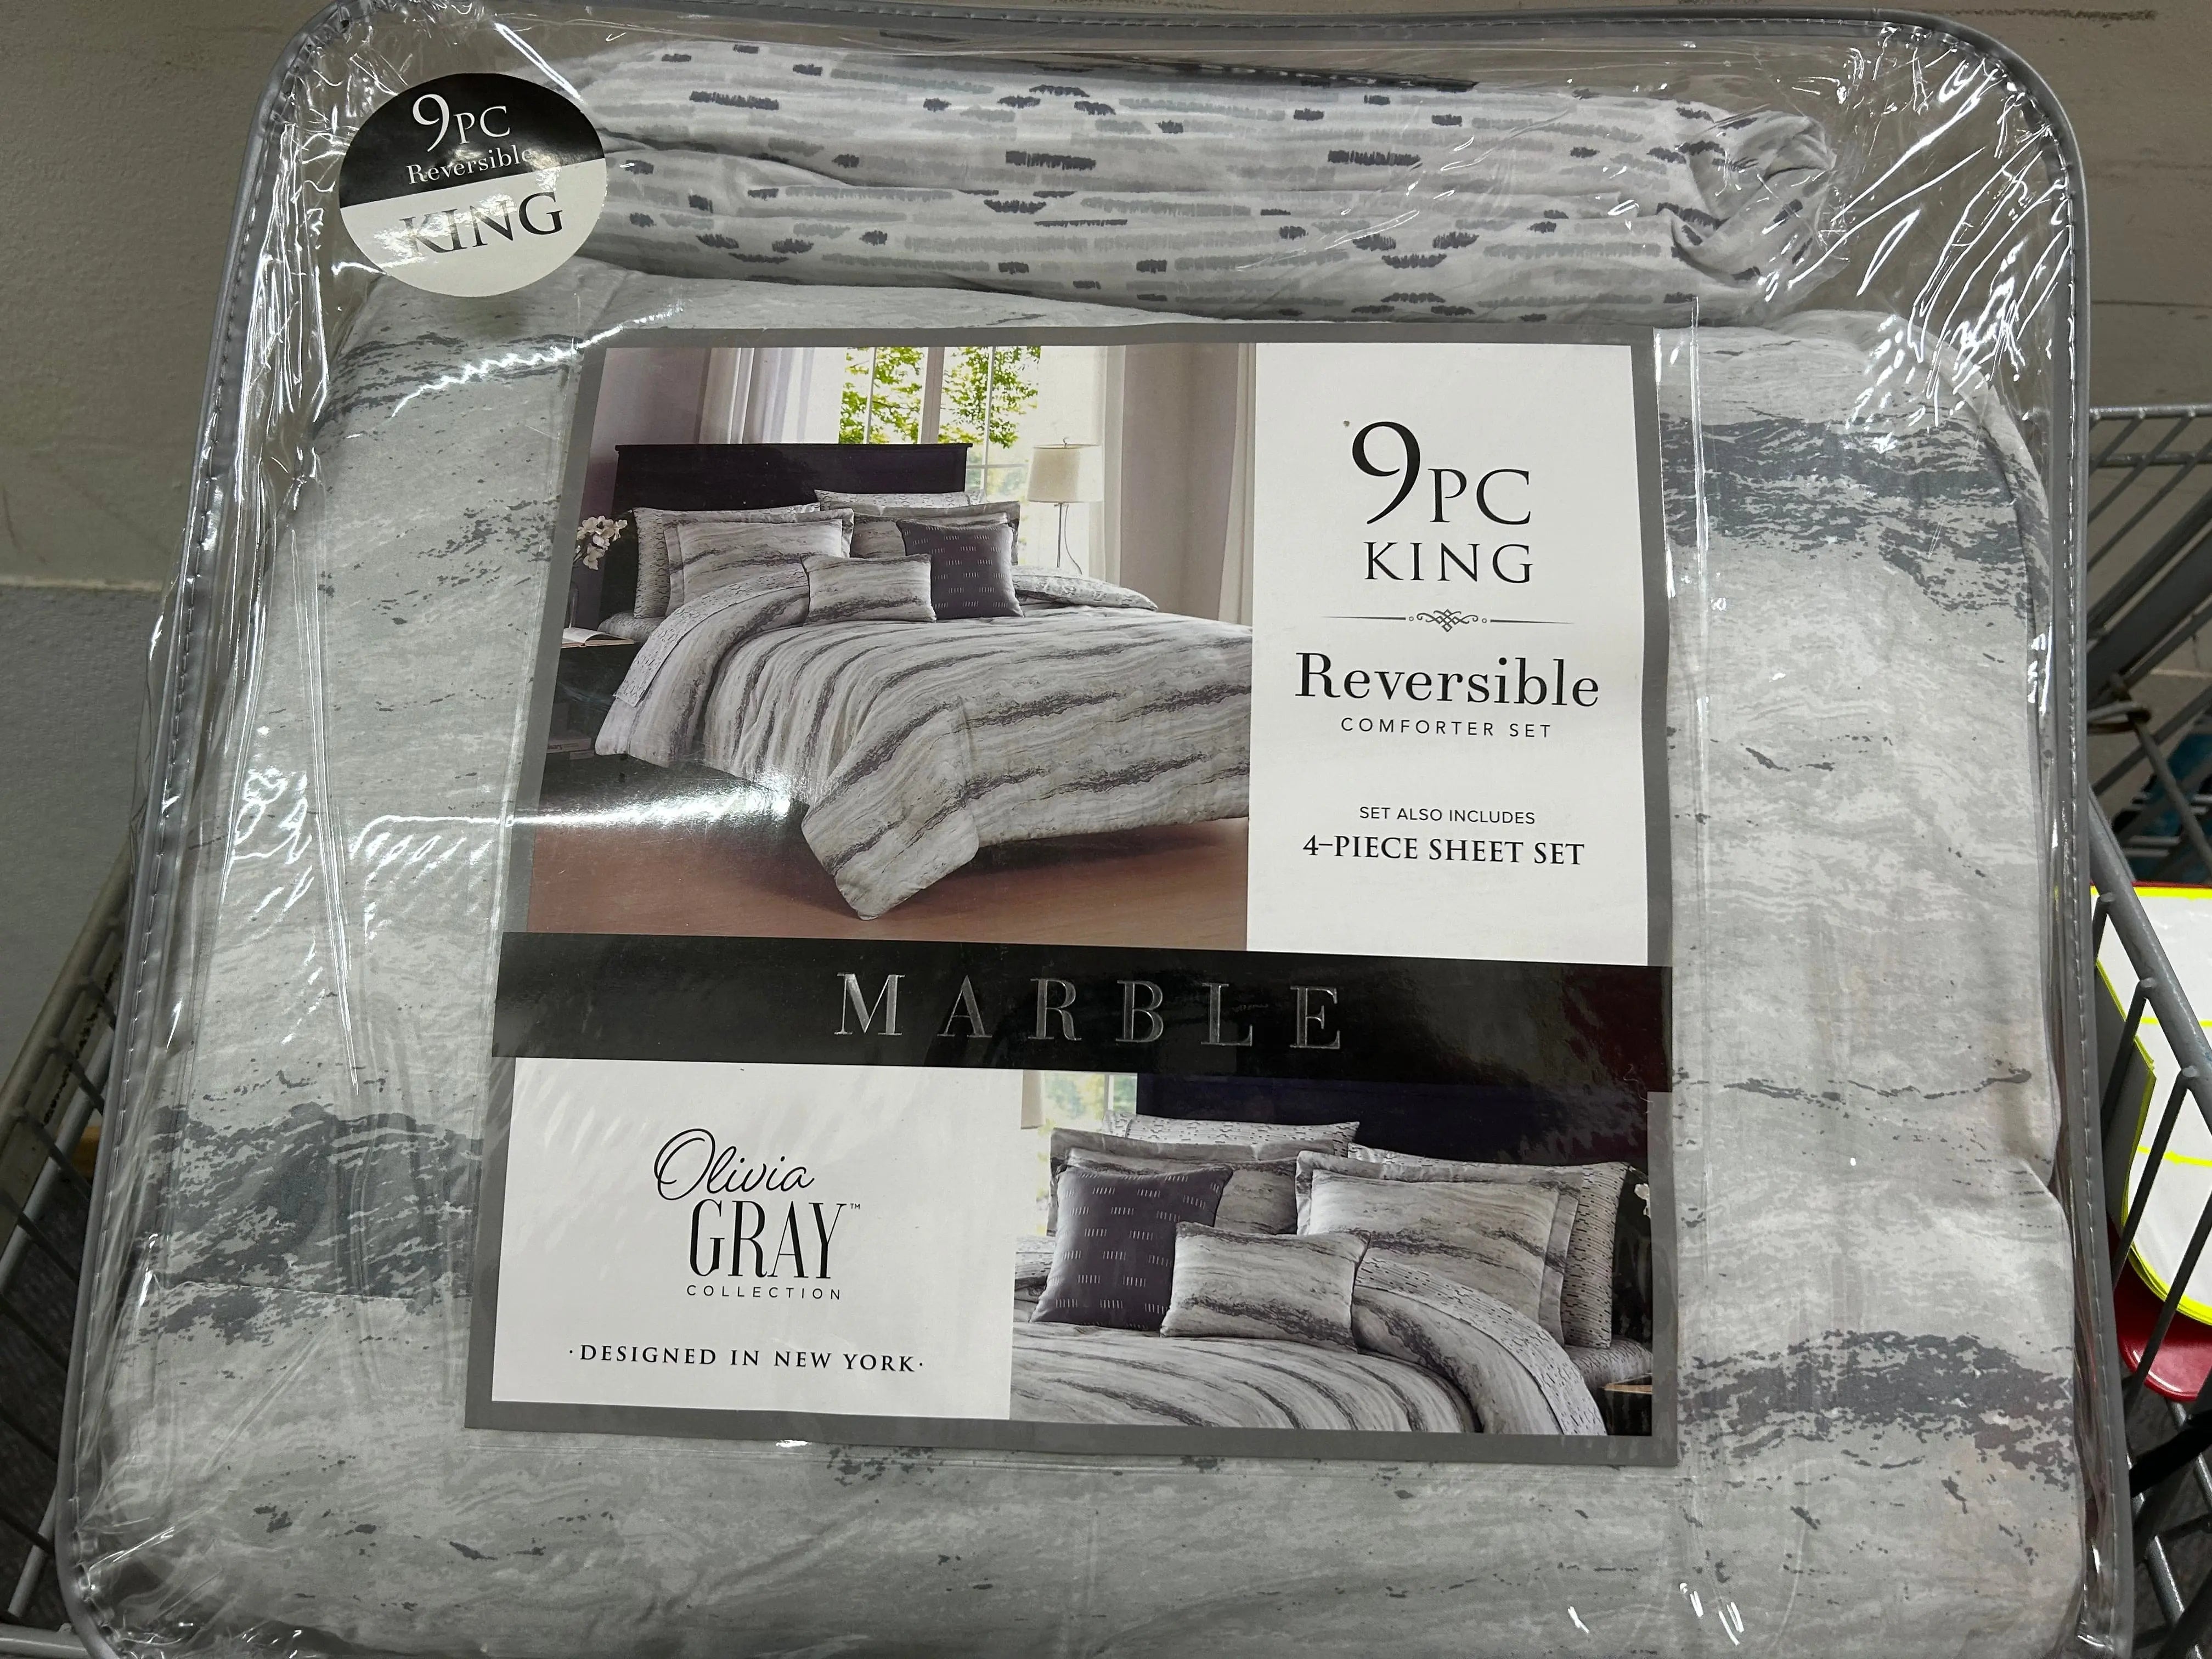 Linen World King / Marble BEAUTIFUL 9 PIECE  OVERSIZED COMFORTER SET. SHEETS INCLUDED